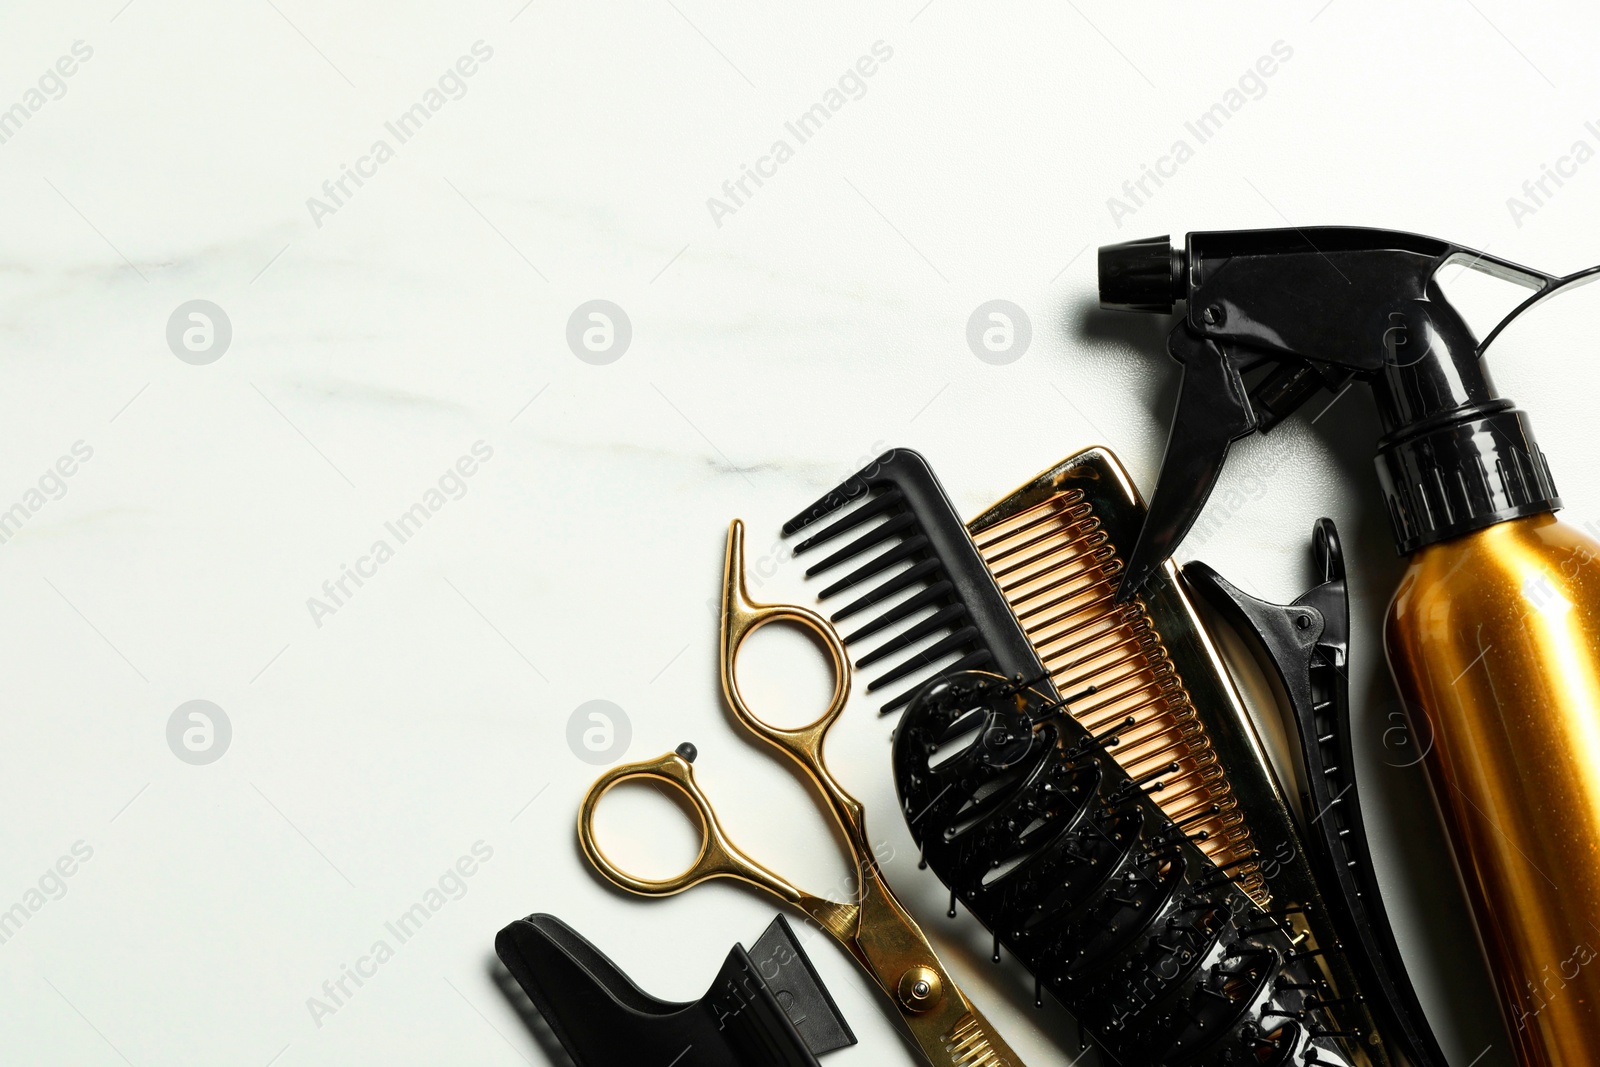 Photo of Hairdressing tools on white marble table, flat lay. Space for text